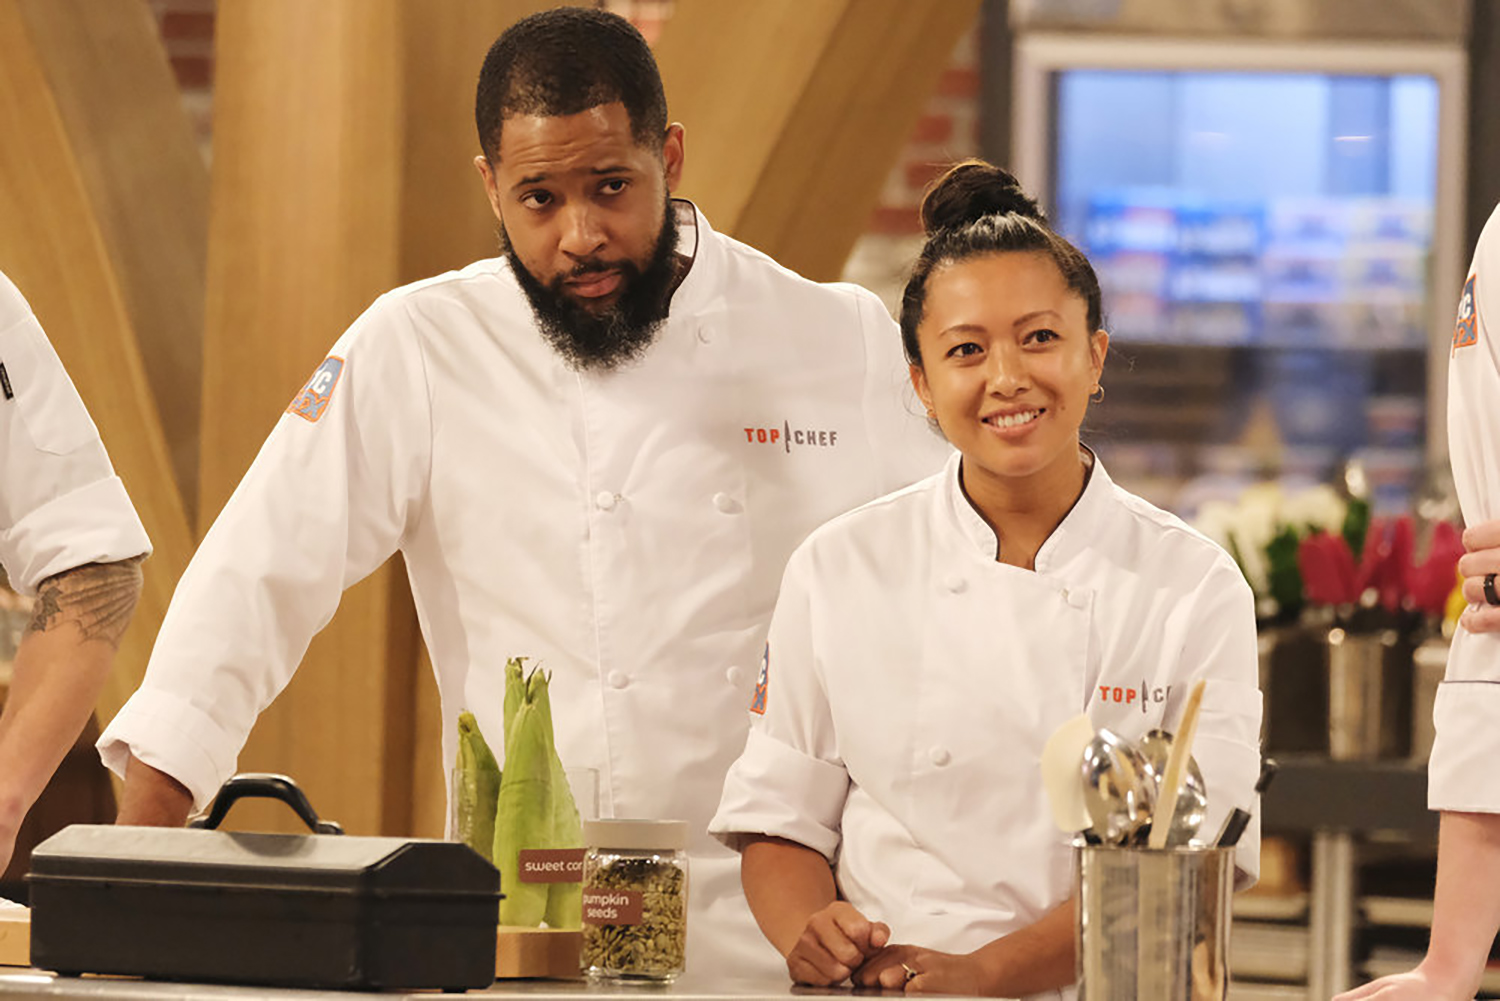 A male chef and a female chef in jackets stand behind a cooking counter listening to someone off camera.